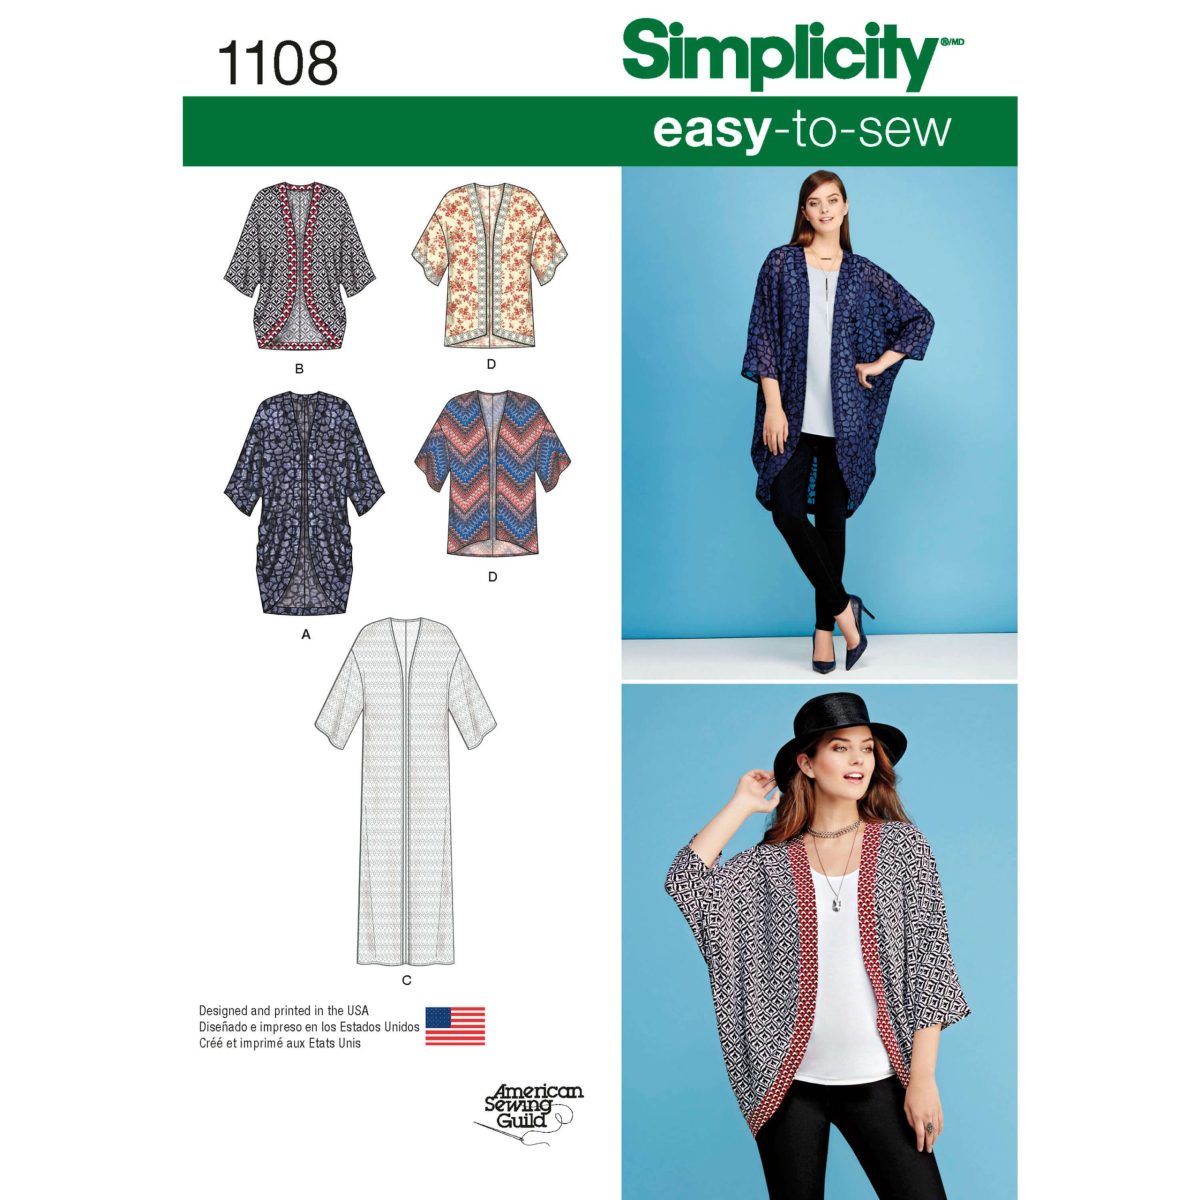 Simplicity Sewing Pattern 1108 Misses' Kimono-Inspired Robe Jackets in Different Styles